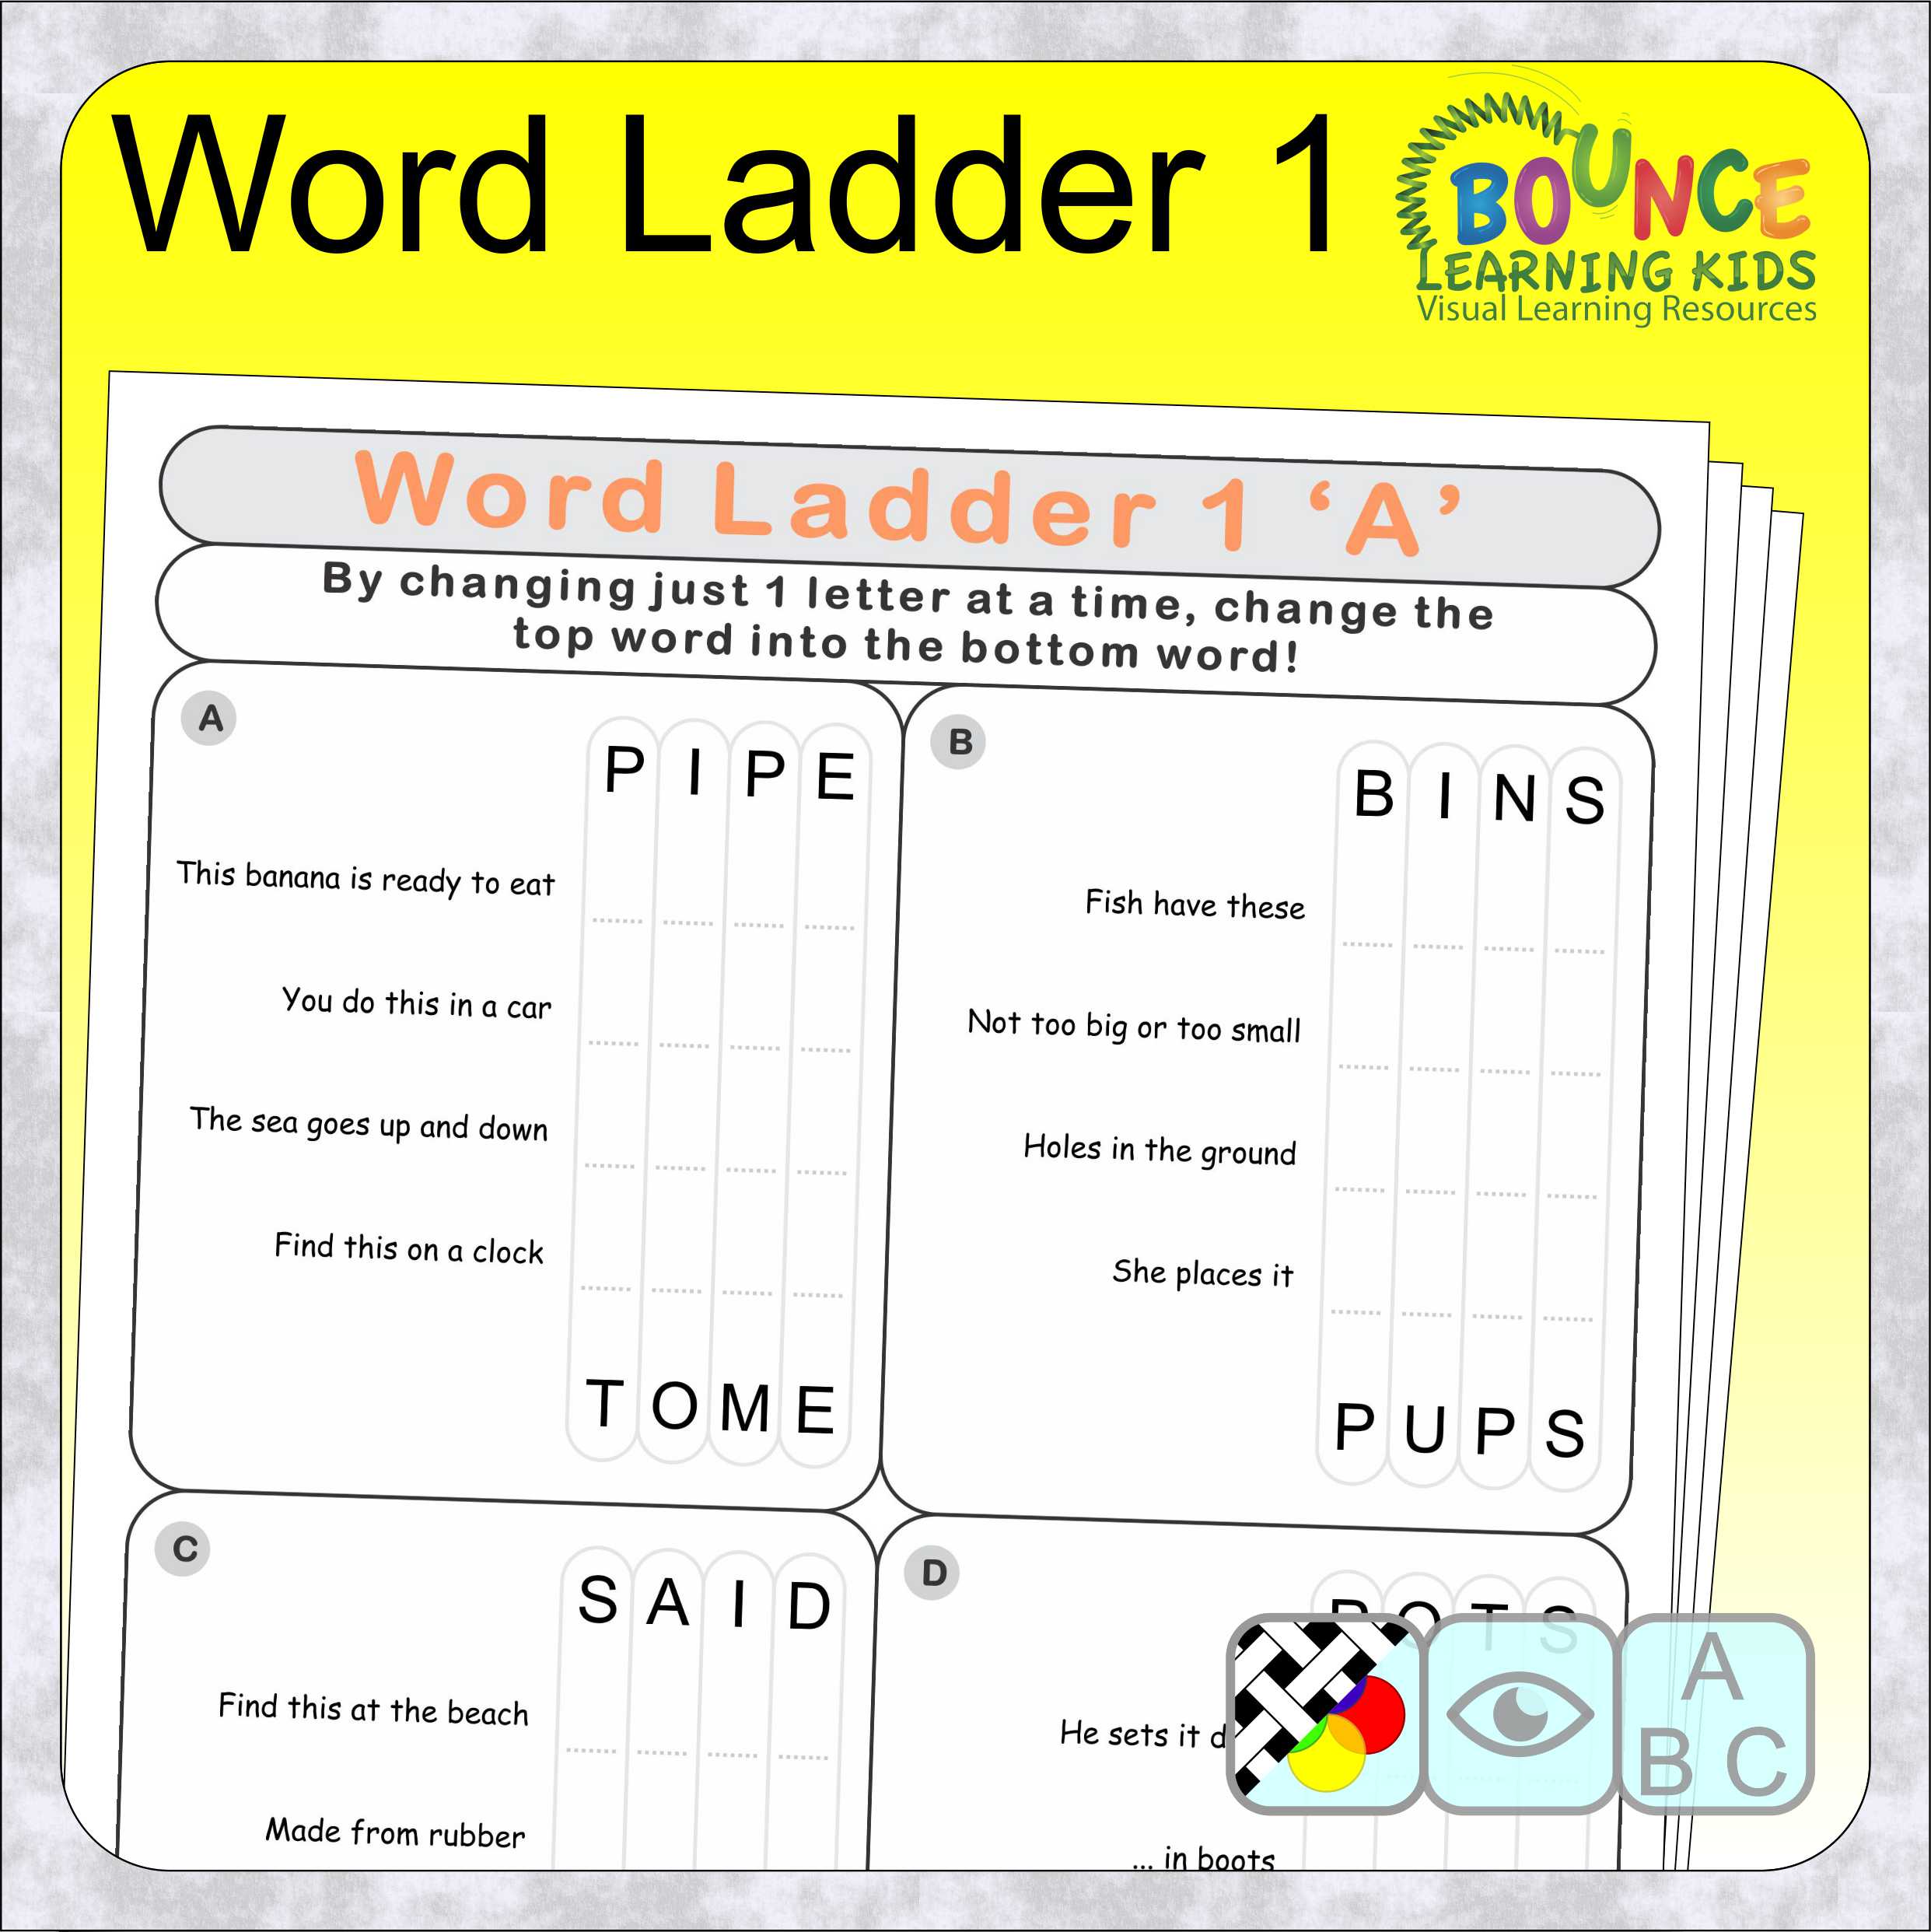 fun-word-ladder-worksheets-with-46-word-ladders-to-solve